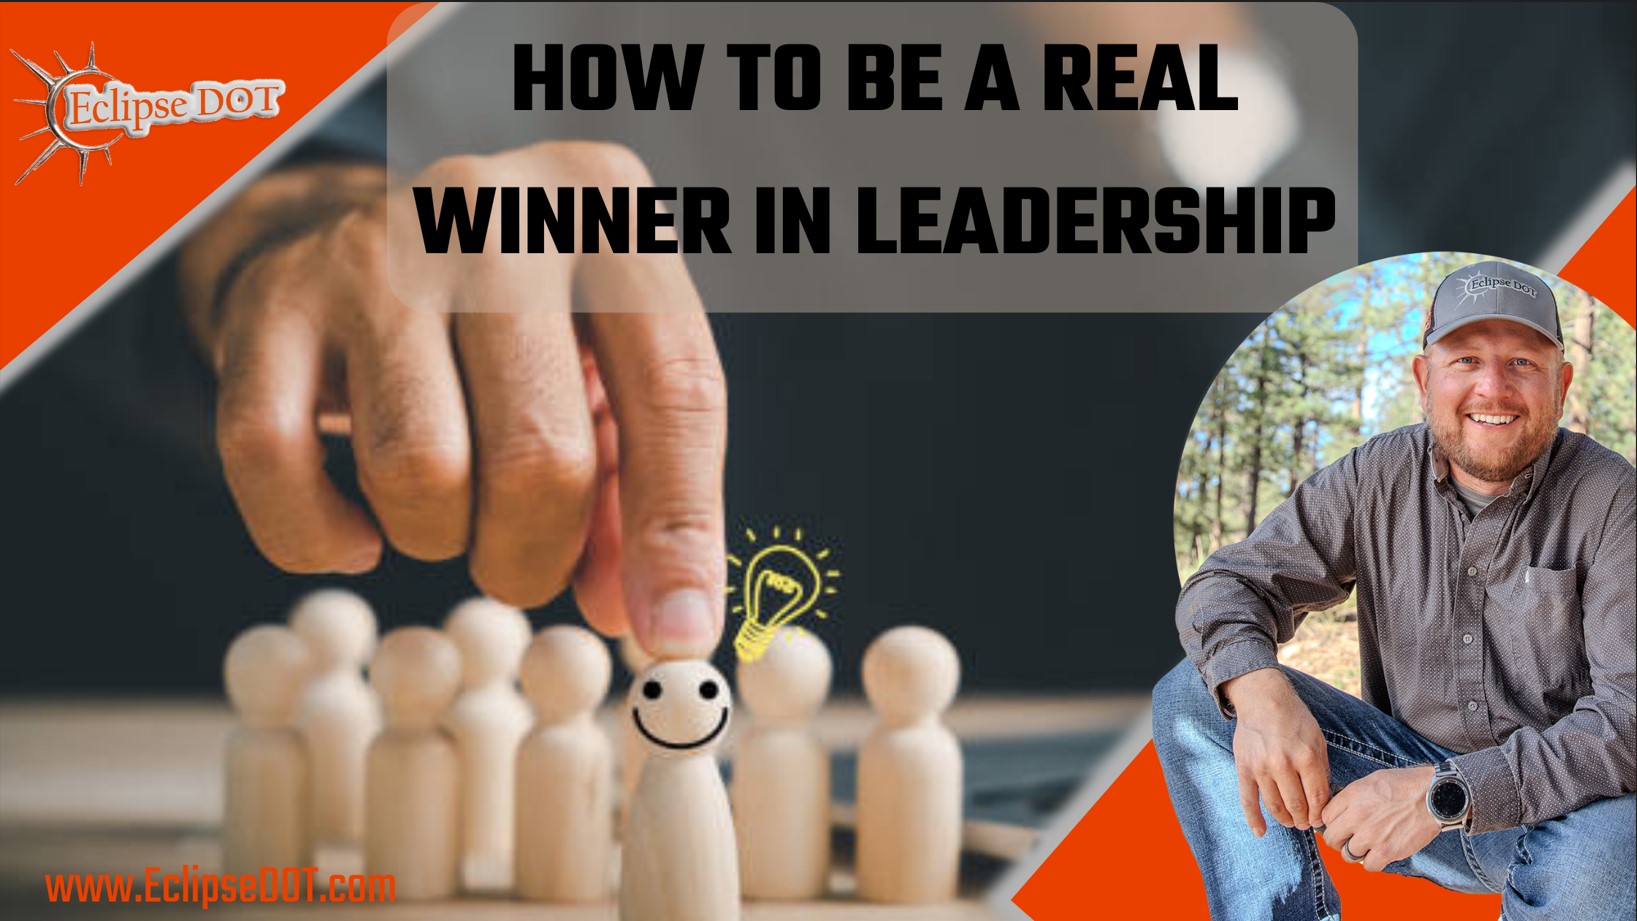 Elevate your leadership game with practical insights on becoming a real winner in your professional journey.